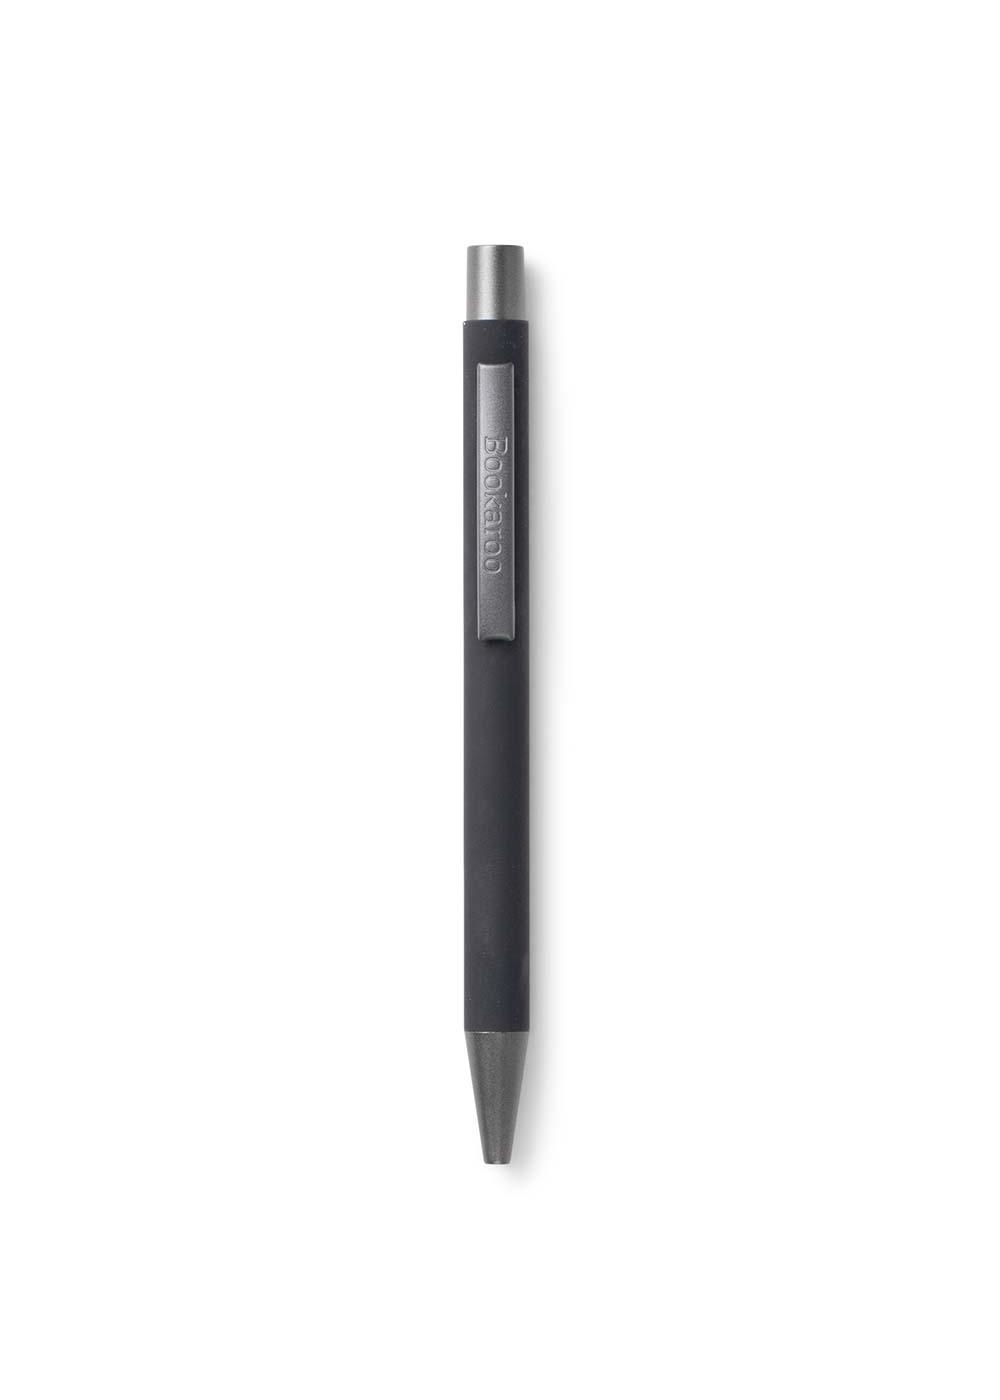 Bookaroo Retractable Ball Point Pen - Black Ink; image 3 of 3